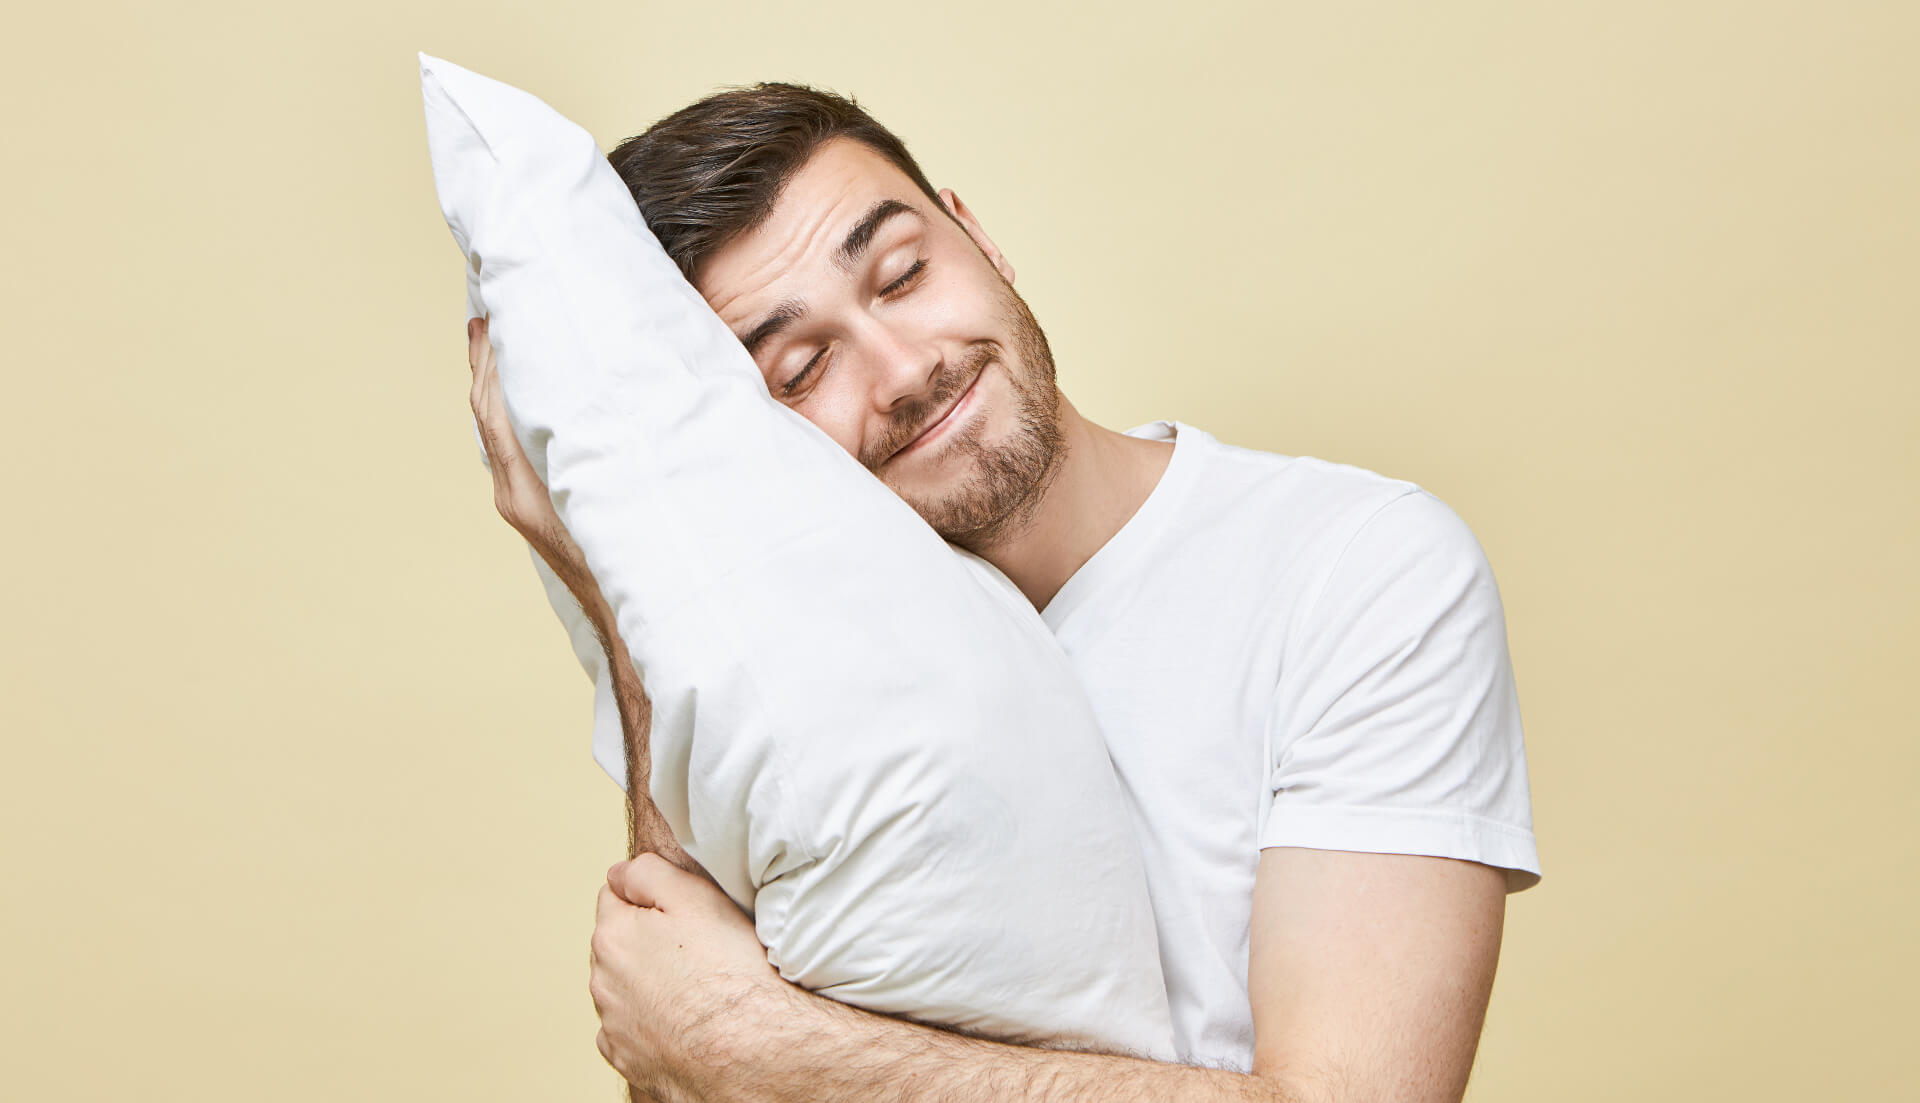 A good quality contoured pillow can improve your sleep position and reduce your headaches - image courtesy of APS